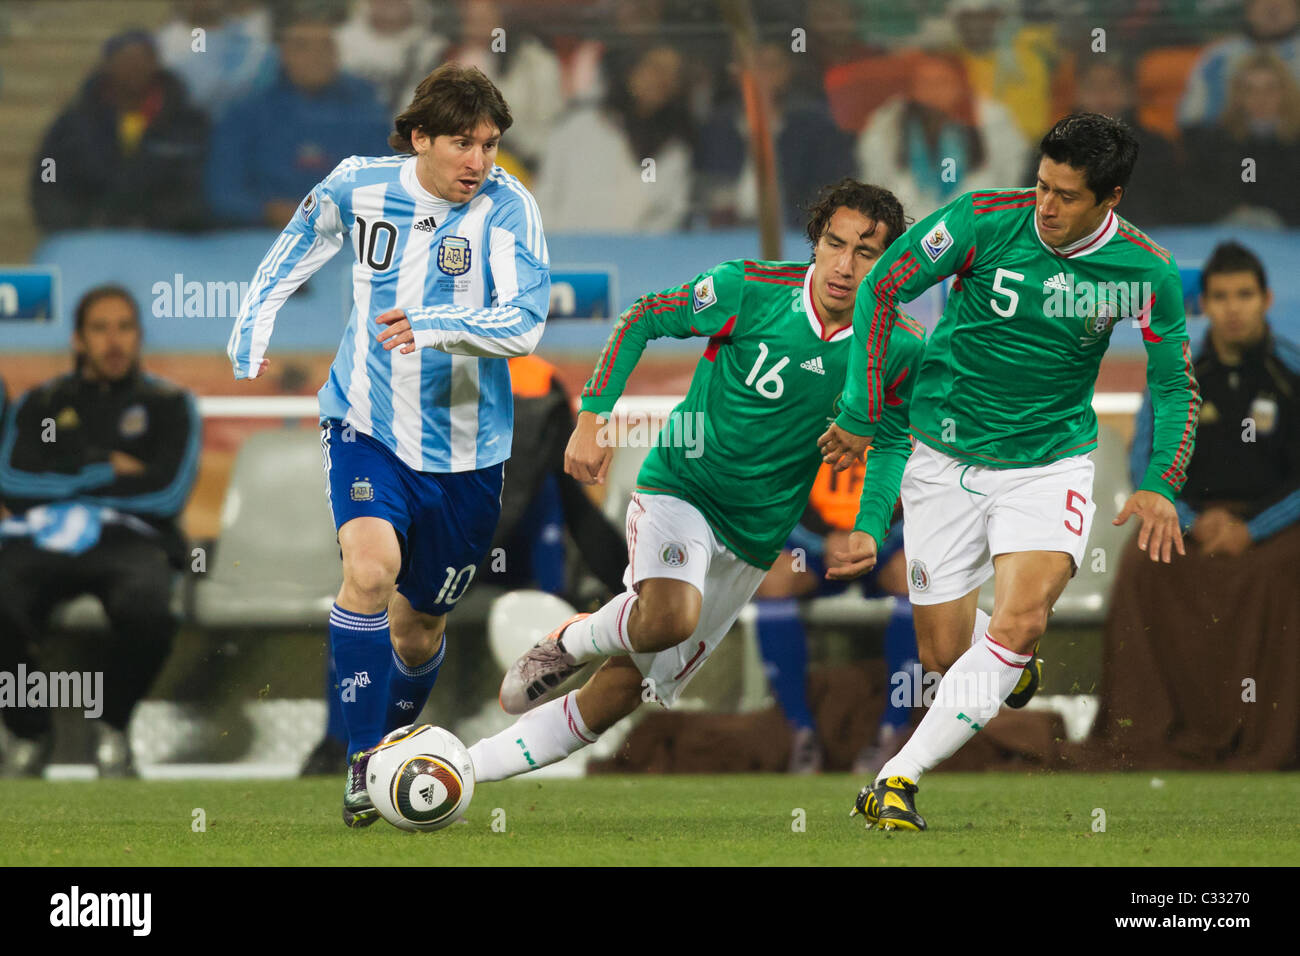 Lionel Messi of Argentina (10) attacks against Mexico's Efrain Juarez (16) and Ricardo Osorio (5) during a 2010 World Cup match Stock Photo